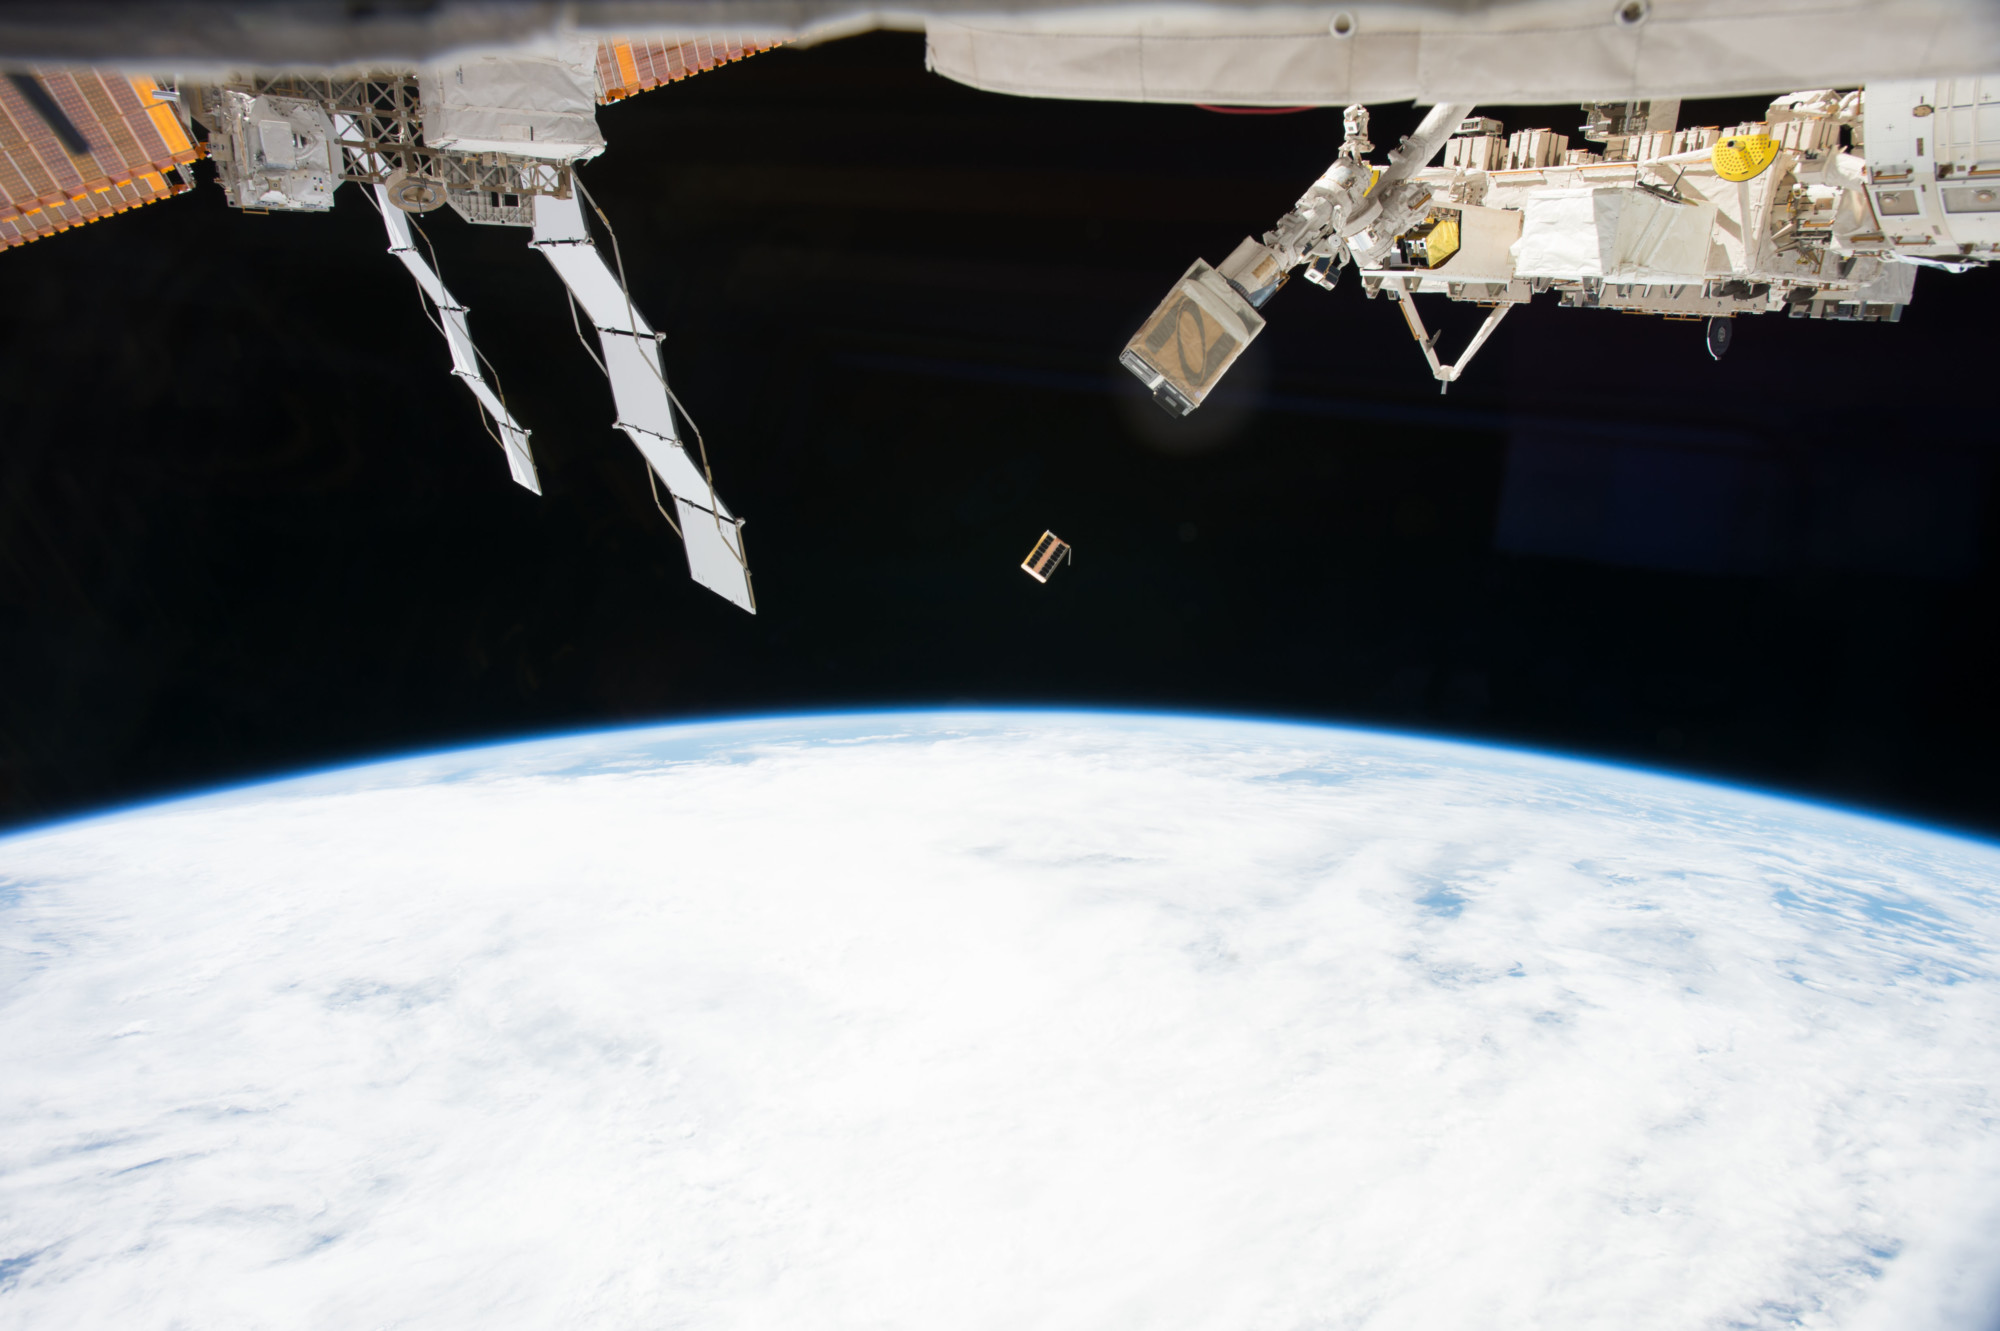 Nanoracks Completes 13th Cubesat Deployment Mission From The Iss